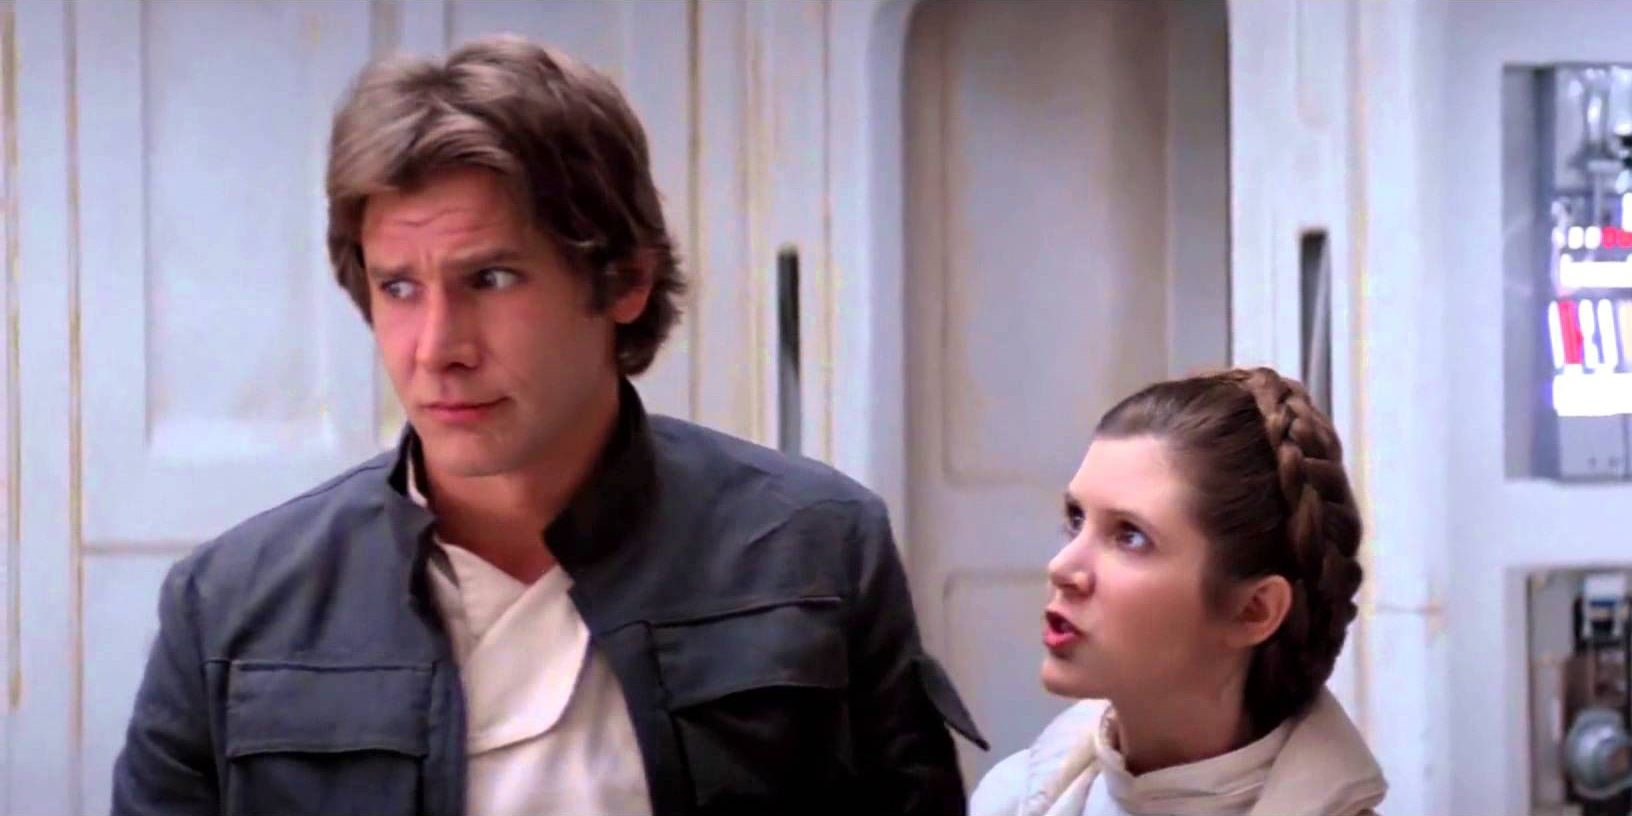 Princess Leia calling Han Solo a nerf herder in Star Wars Empire Strikes Back